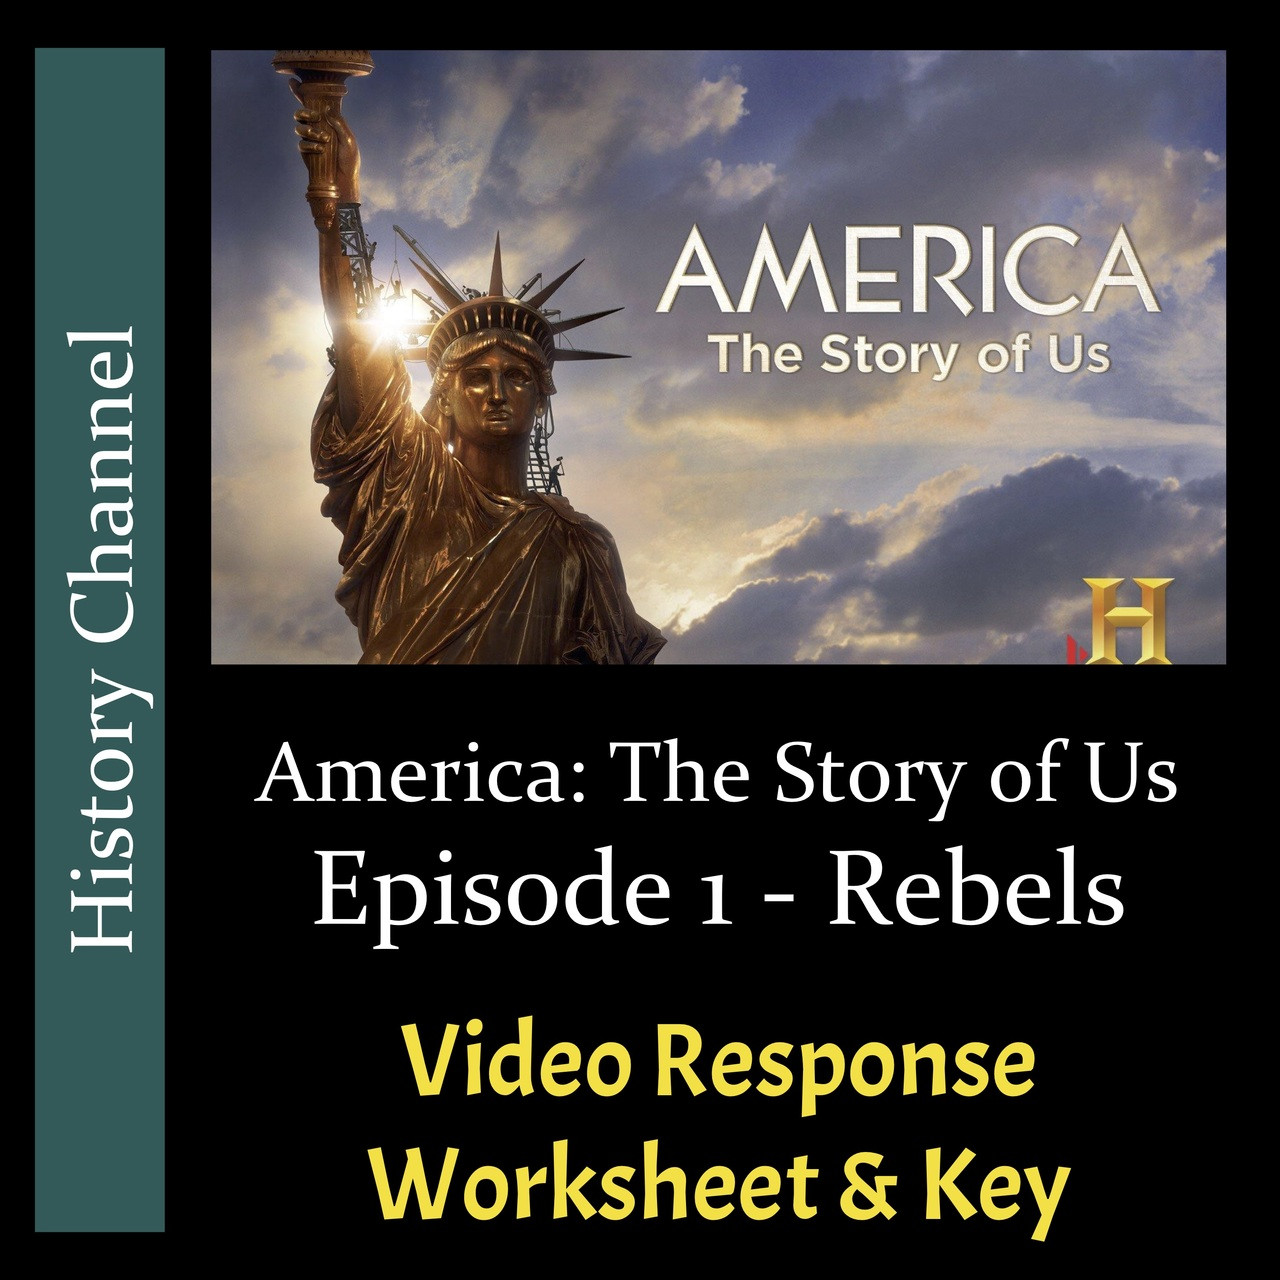 america-the-story-of-us-episode-1-rebels-video-response-worksheet-editable-amped-up